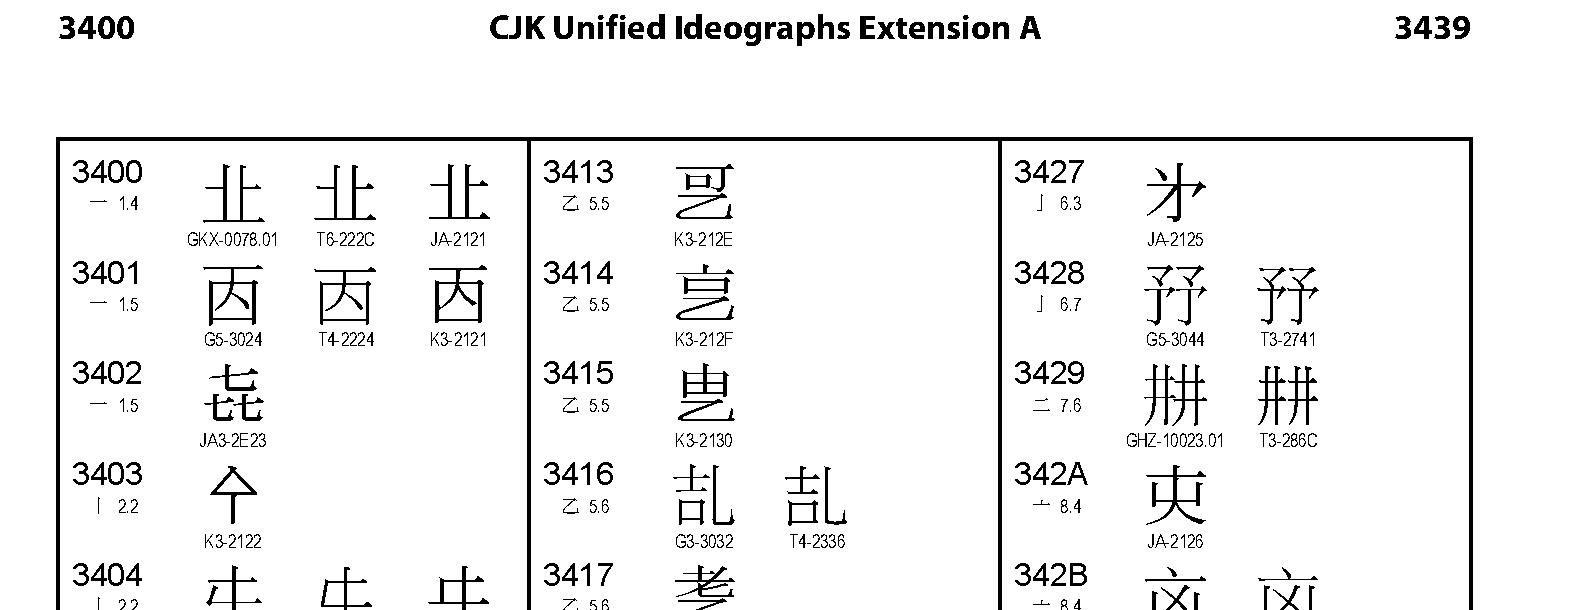 Unicode - CJK Unified Ideographs Extension A